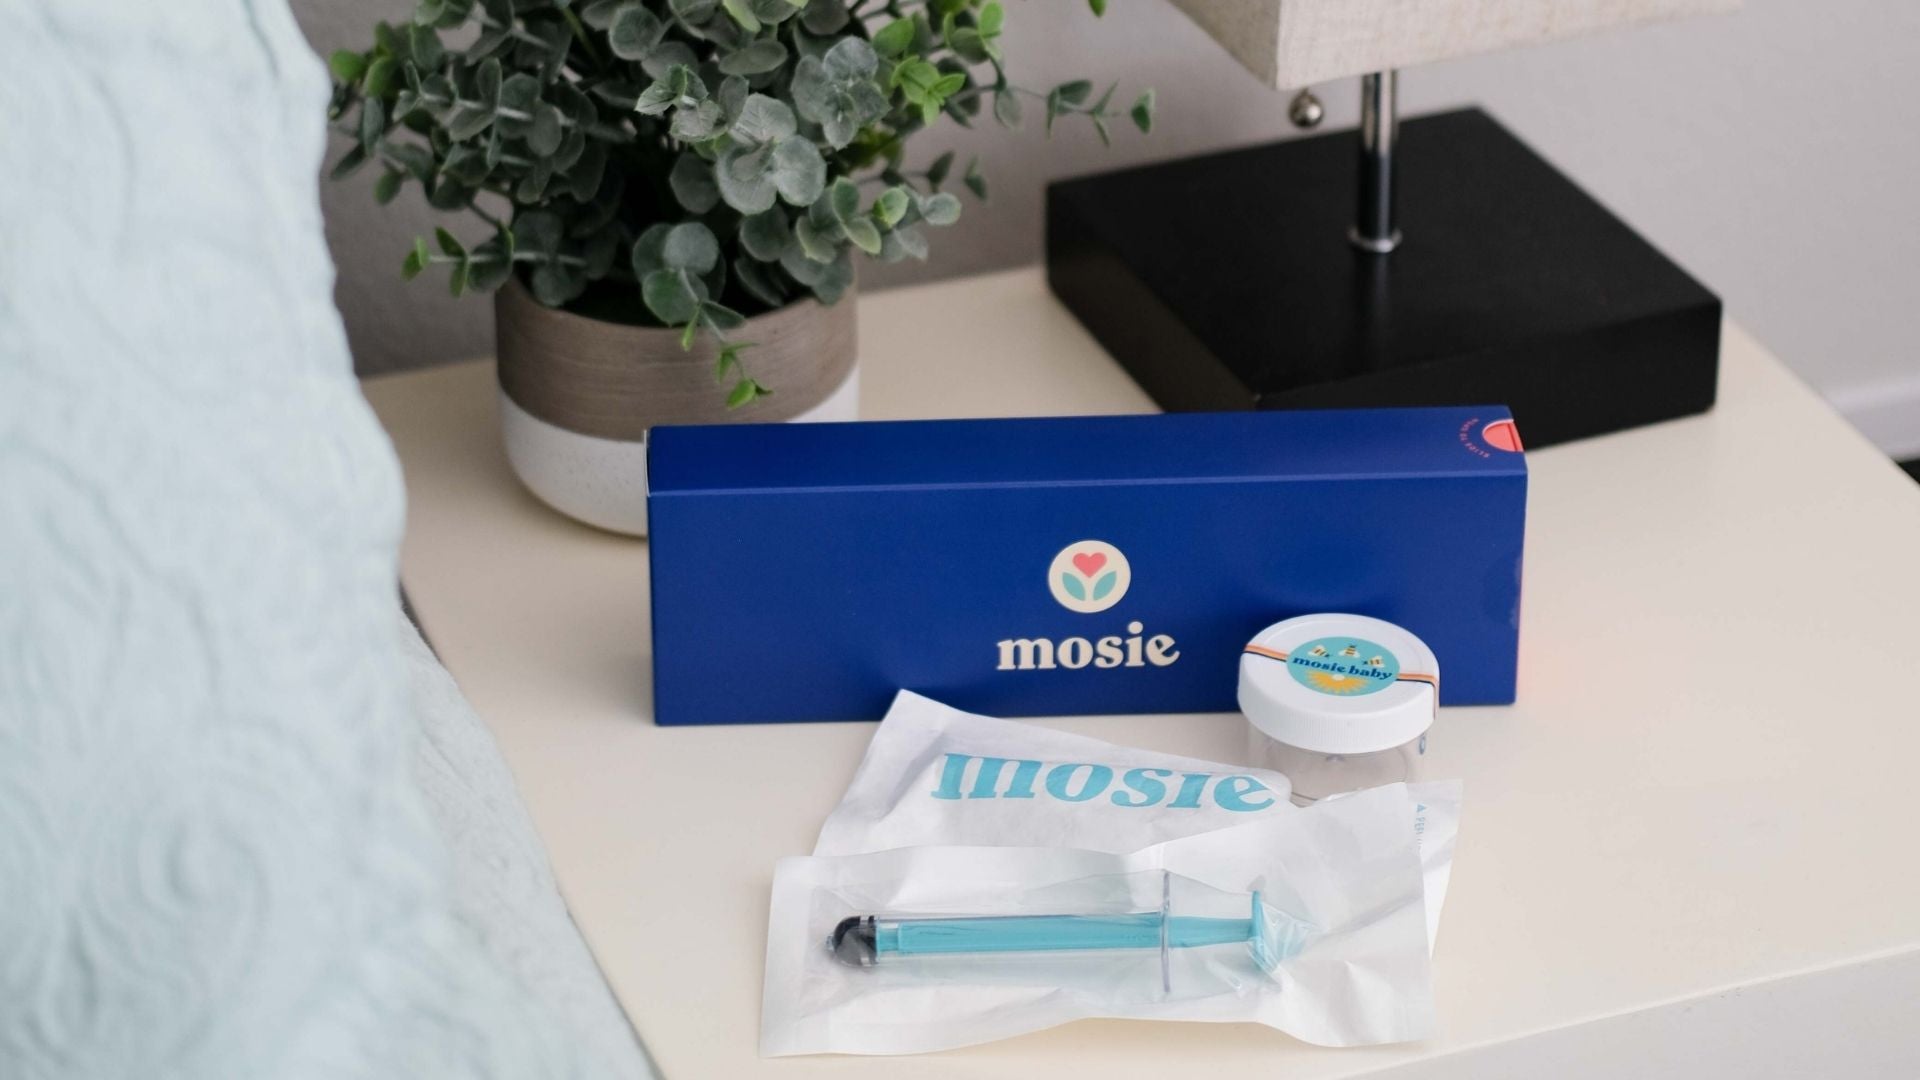 The Mosie Kit opened with both Mosie syringes and collection cup on a bedside table with plant and lamp